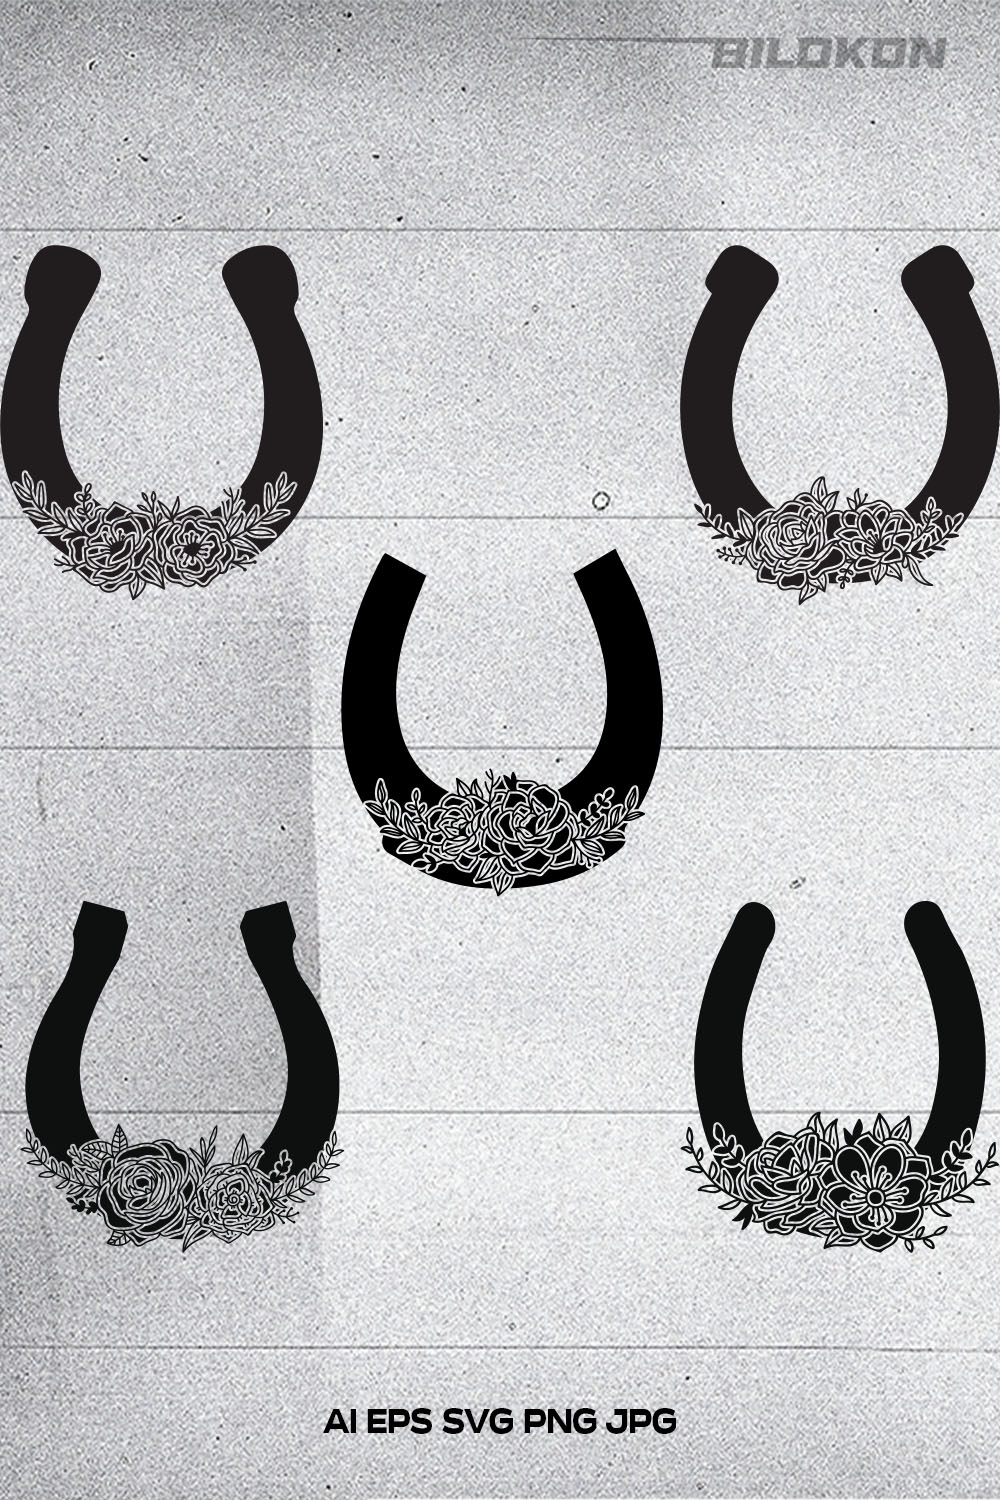 Set of four black and white images of horseshoes.